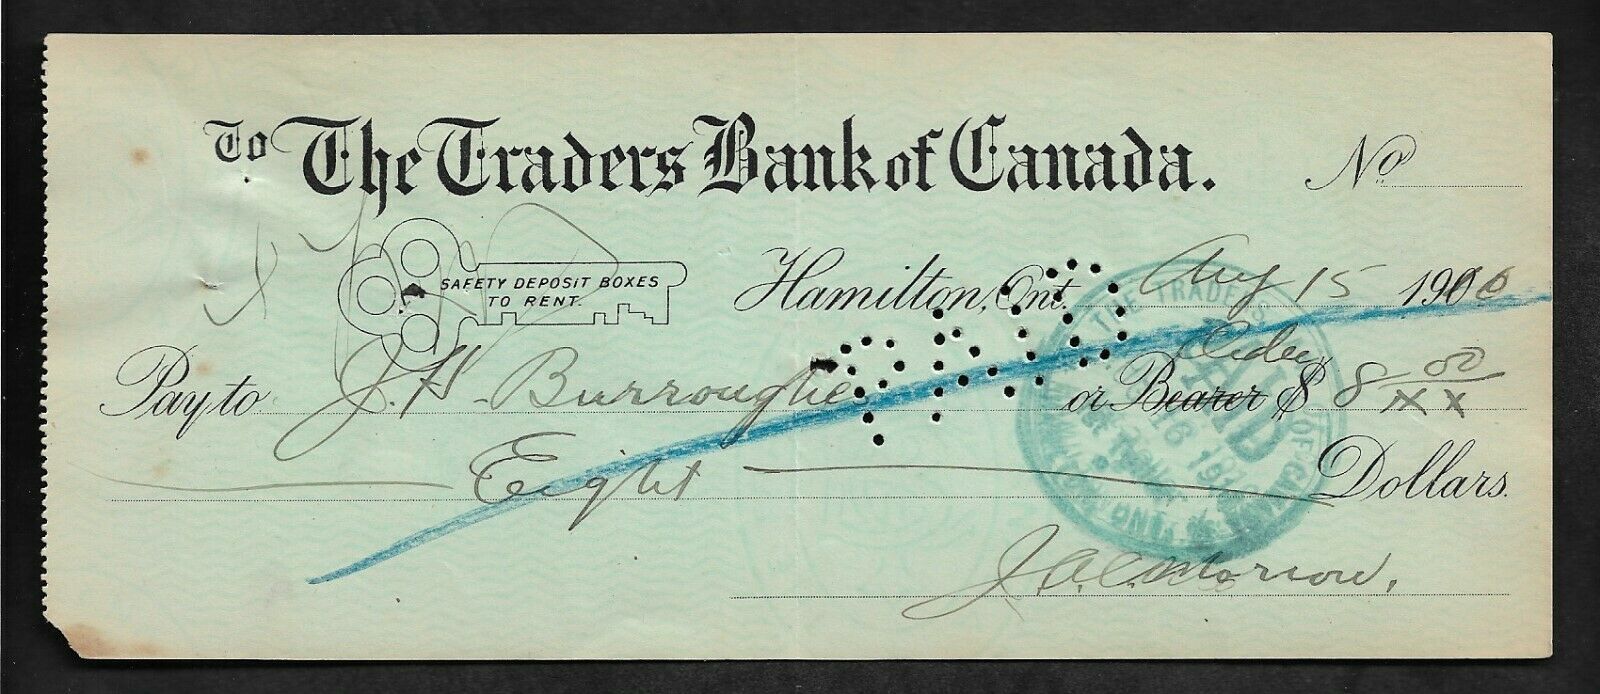 Check The Traders Bank Of Canada Aug 15 1916